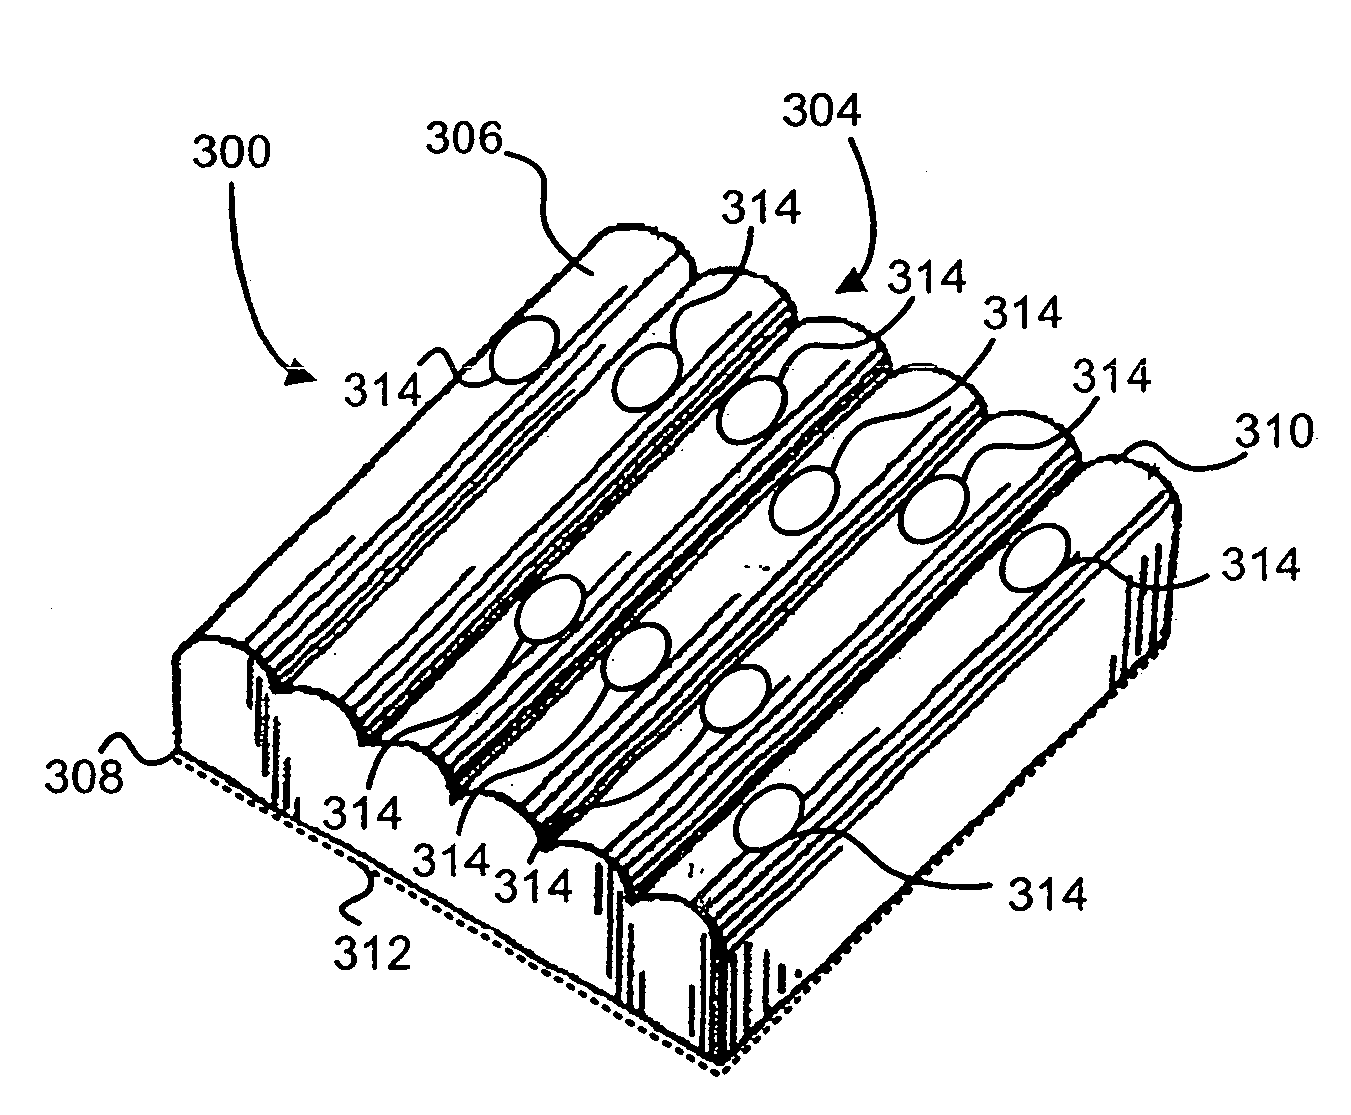 Microlens windows and interphased images for packaging and printing and methods for manufacture